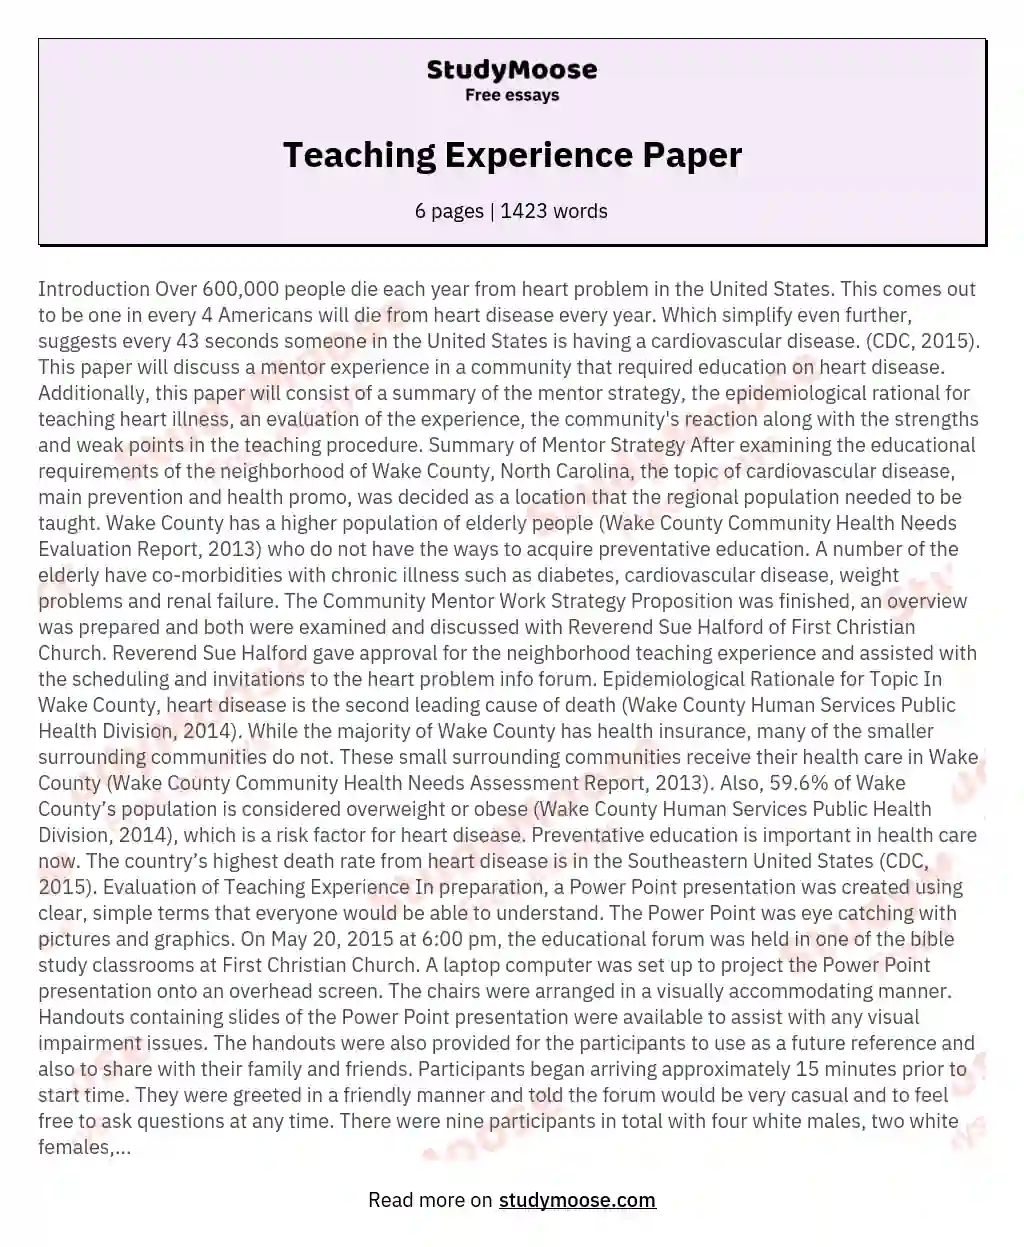 Teaching Experience Paper essay